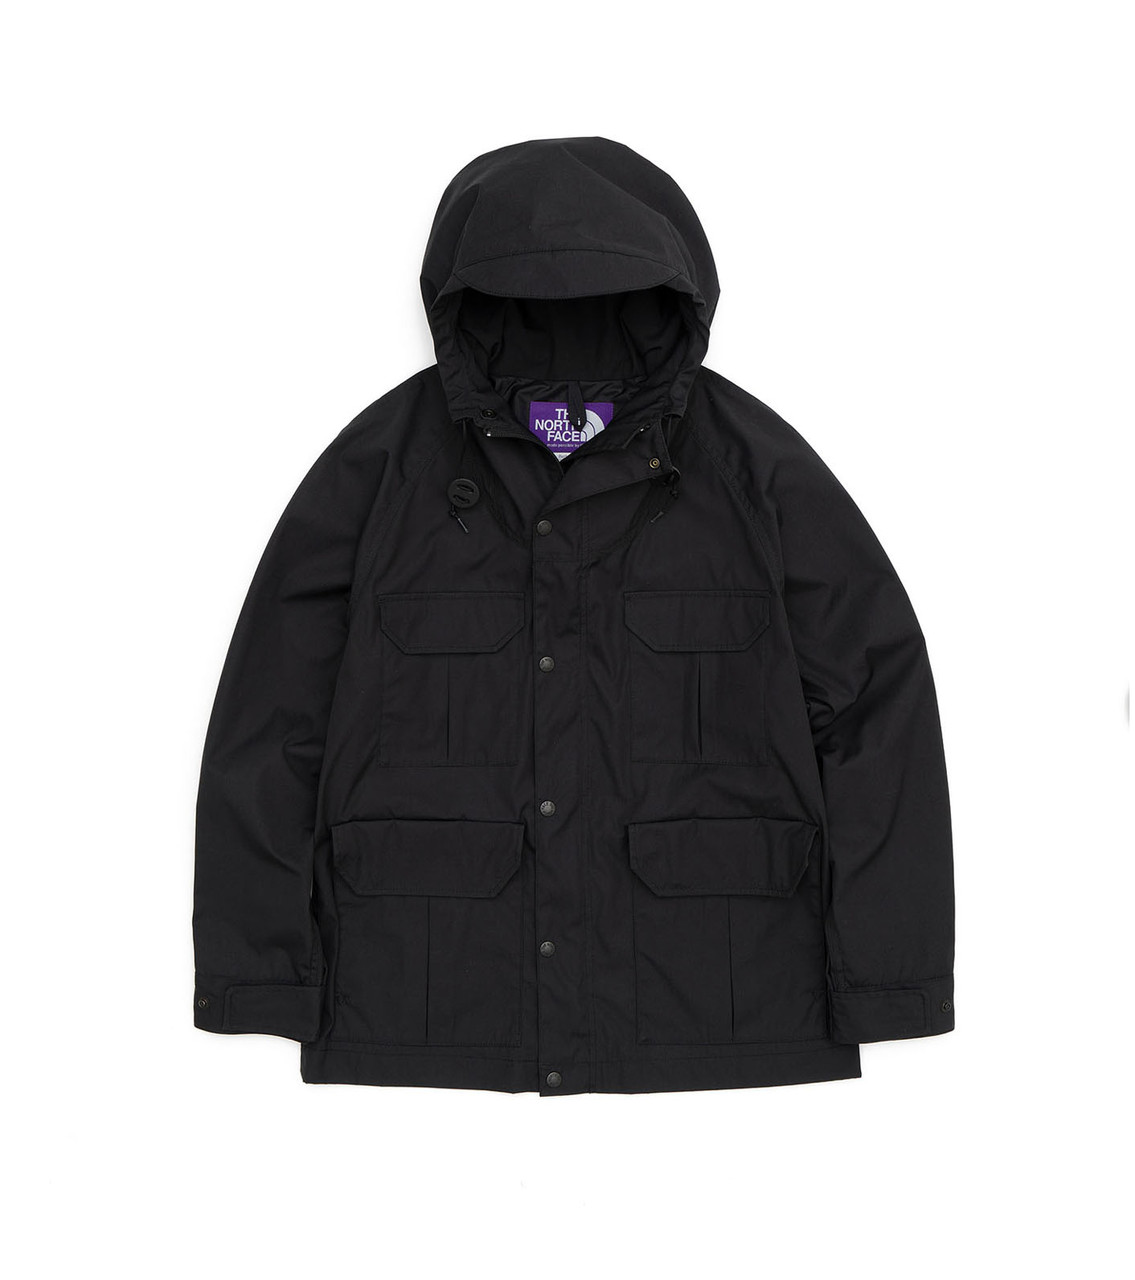 THE NORTH FACE PURPLE LABEL JACKET 65/35 Mountain Parka Online 